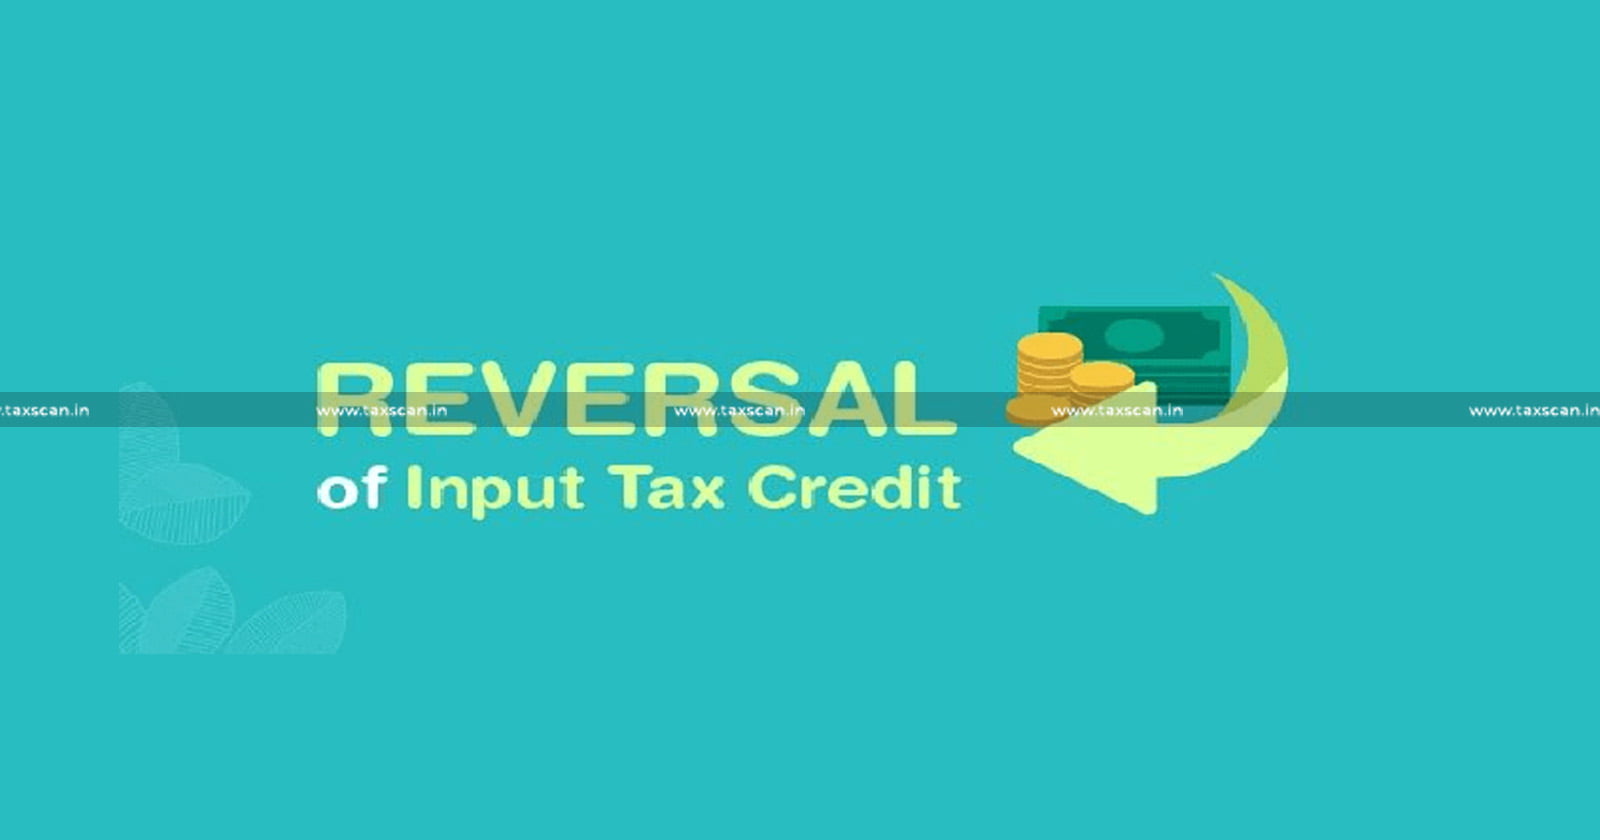 GST Council - GST- Reversal of ITC - GST Provision - GST Provision for Reversal of ITC - Non-Payment of Tax - Supplier - taxscan